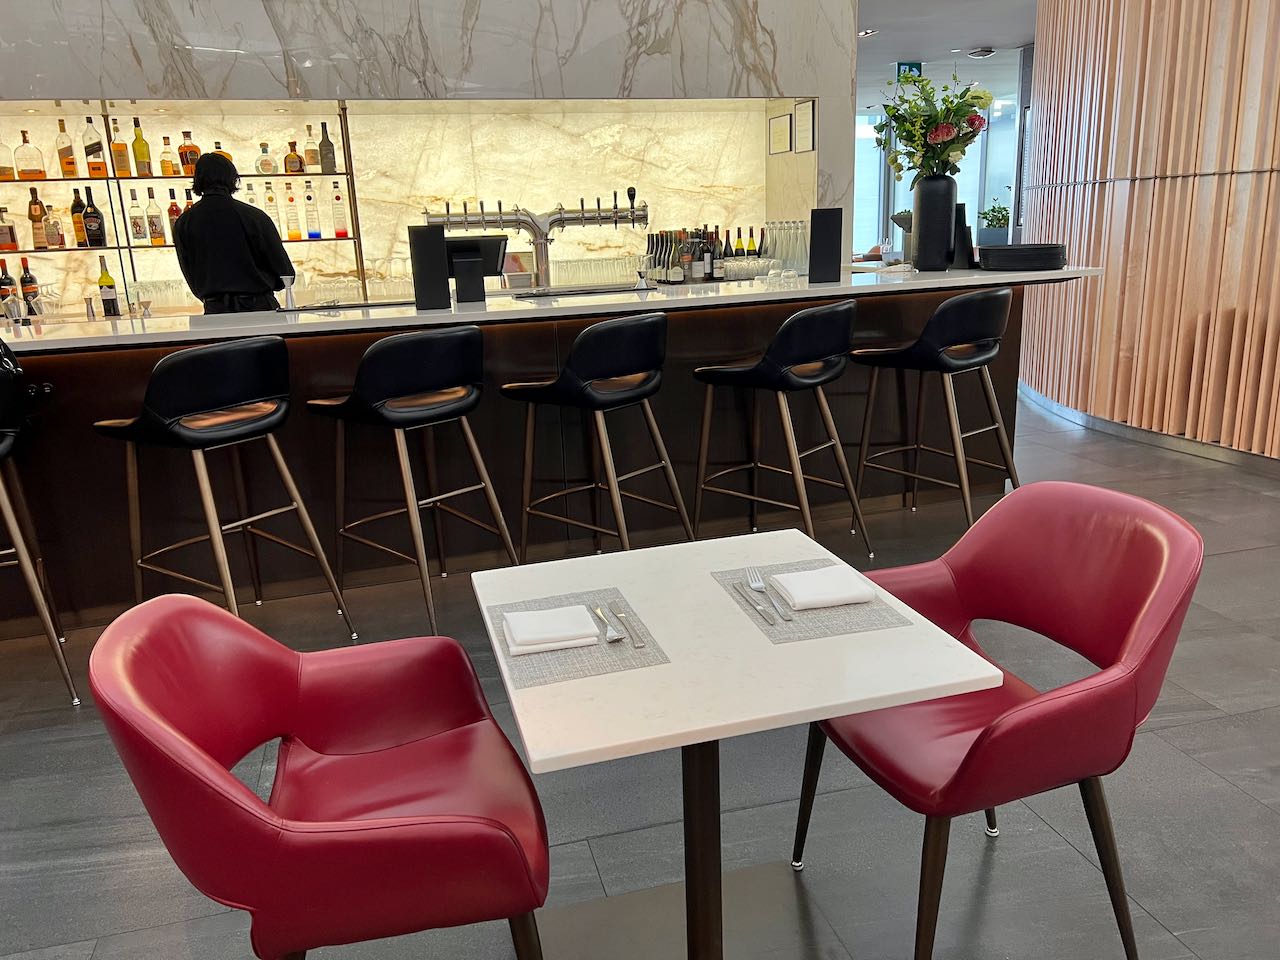 The luxurious airport lounge has a white marble clad cocktail bar.